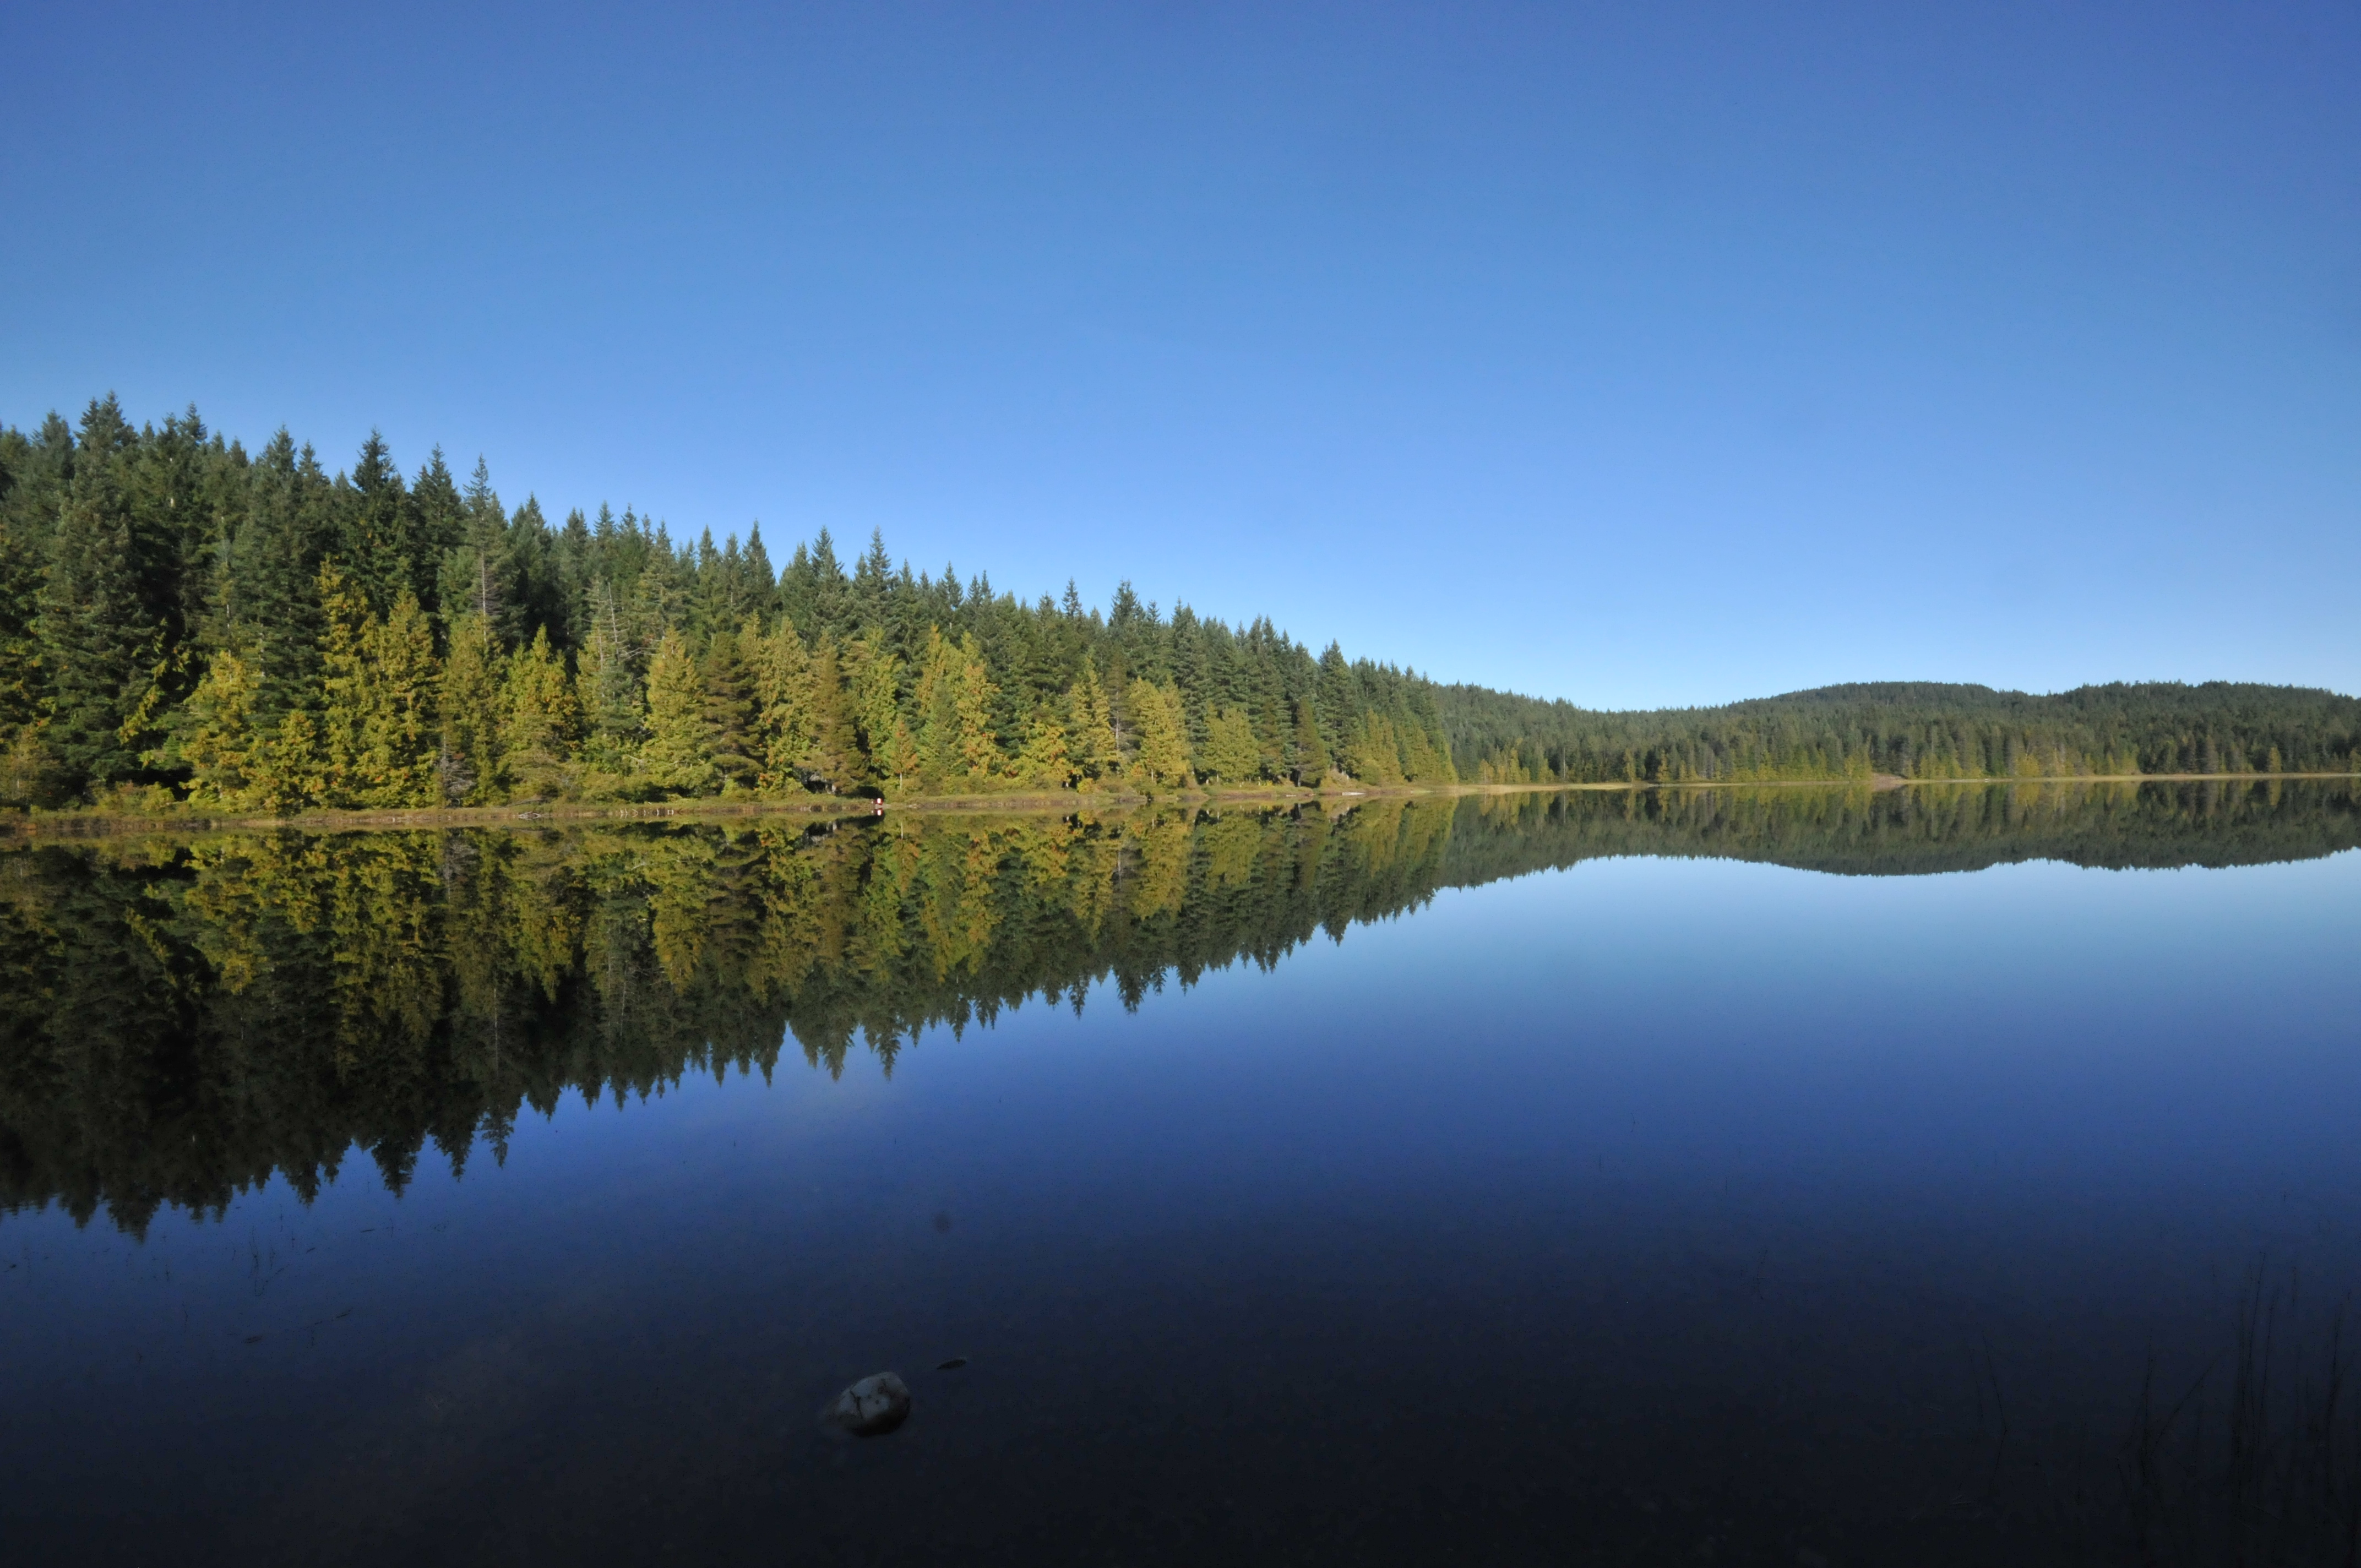 A calm photo of Morton Lake with very crisp reflections of the forest and mountain in the background.